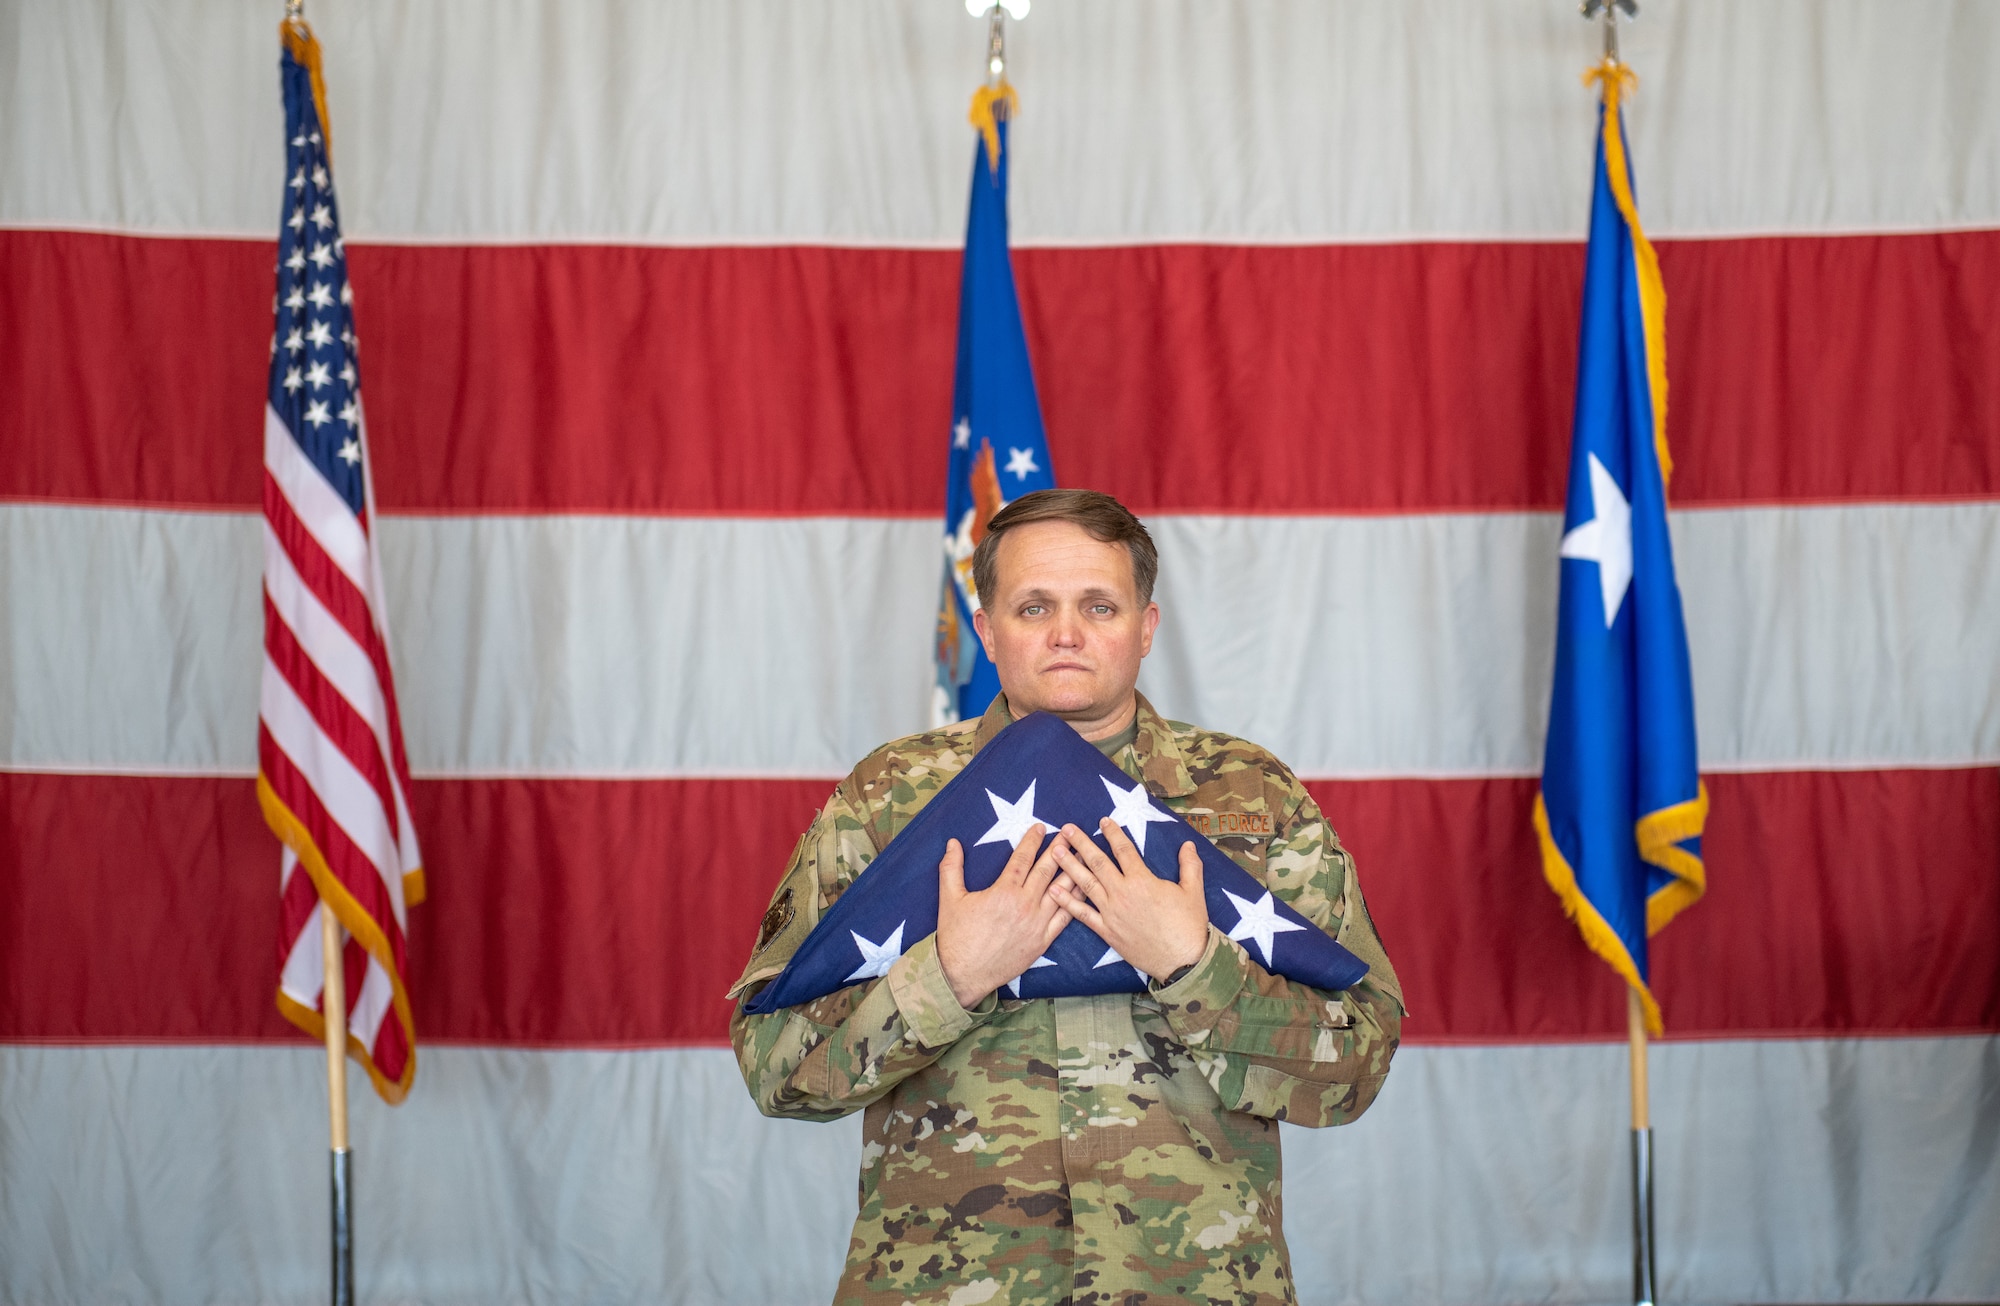 Chief Master Sgt. Paul Strazz, Command Chief of the 419th Fighter Wing, prepares to hand off the flag symbolizing the transfer of responsibilities to the next generation of Airmen during a retirement ceremony June 6, 2021 at Hill Air Force Base, Utah.